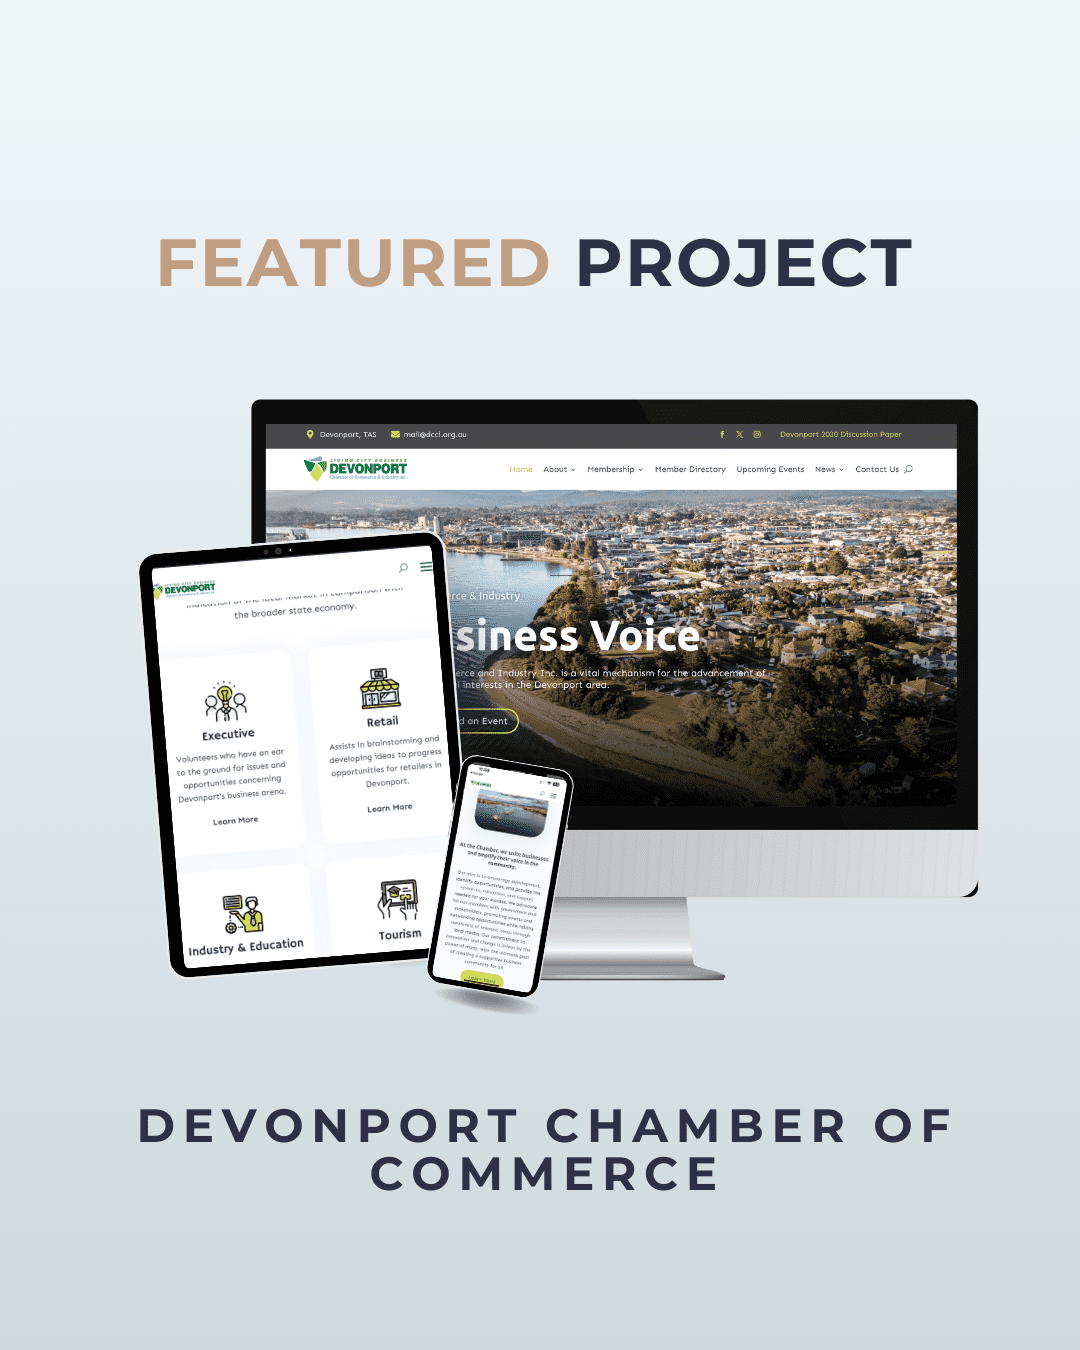 Unwrapping the Redesigned Devonport Chamber of Commerce Website